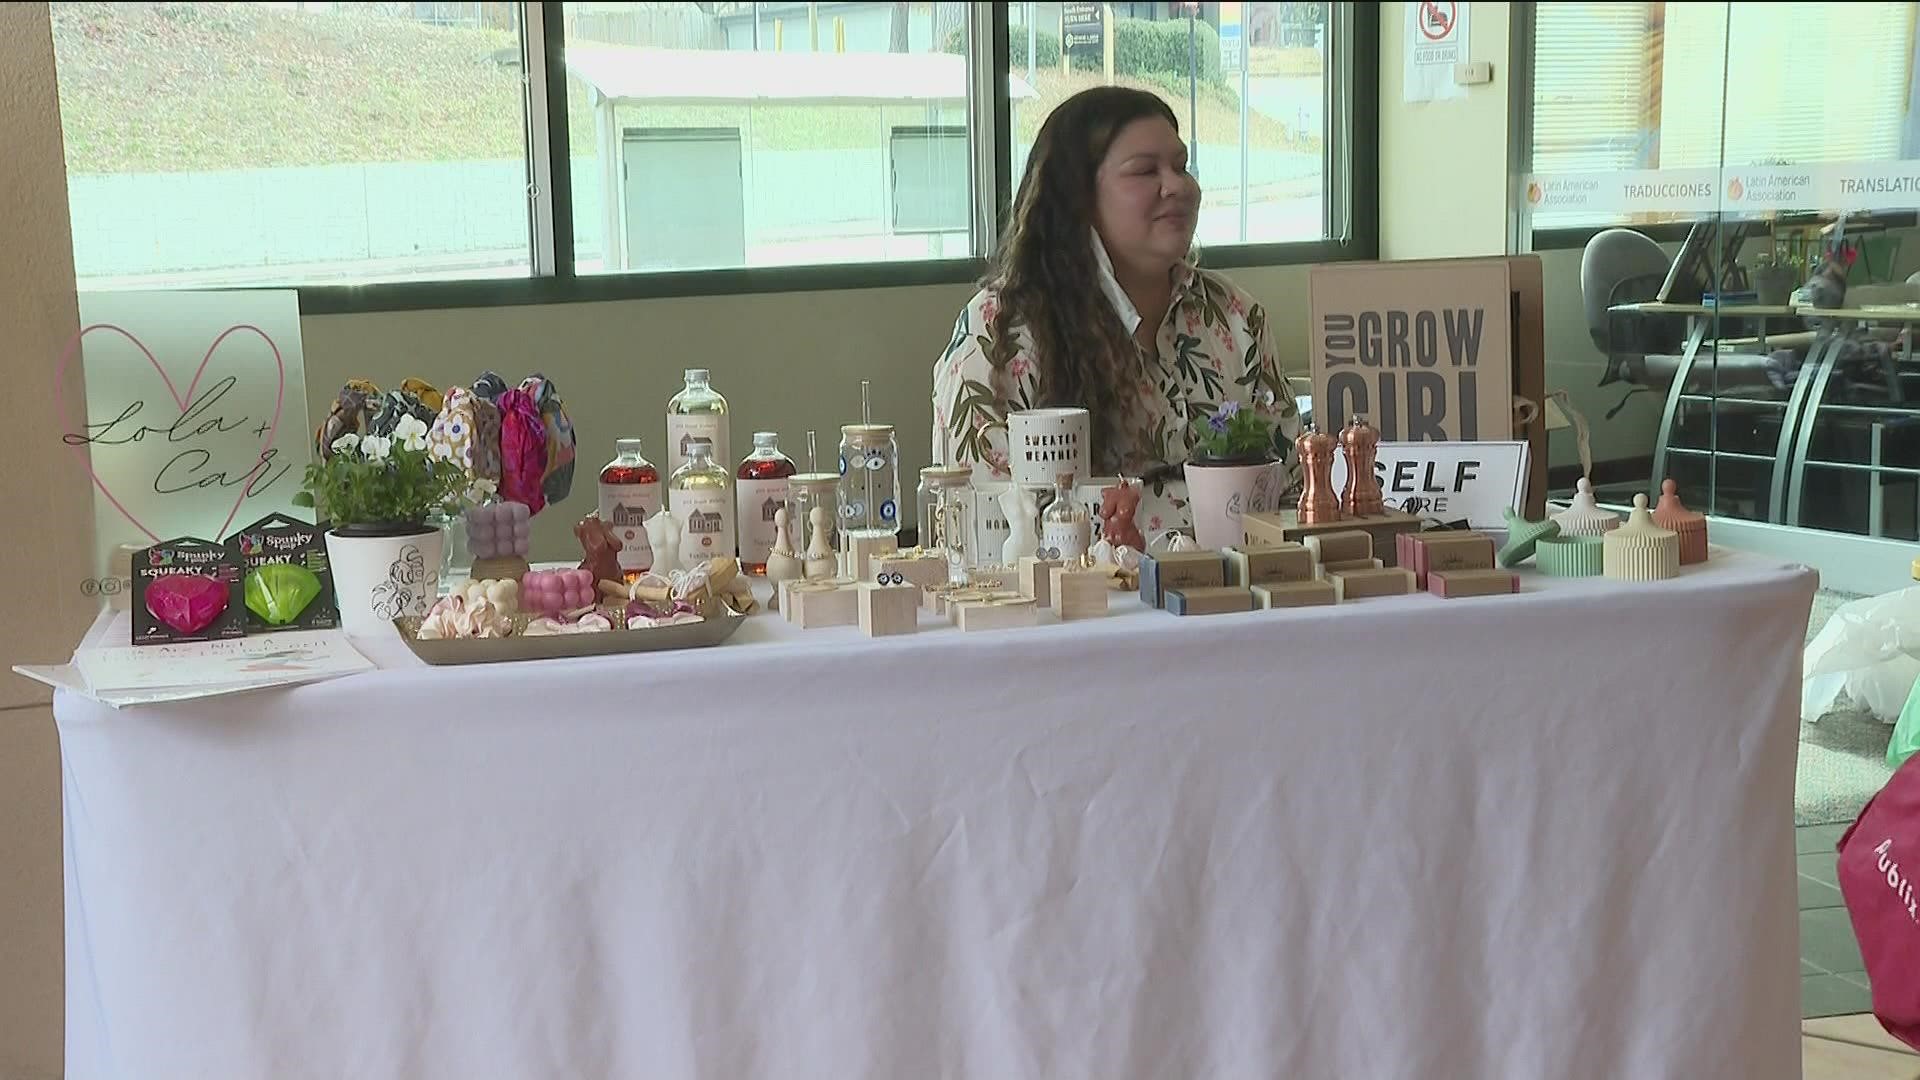 The event is a part of an on-going program helping Latina entrepreneurs grow their businesses.